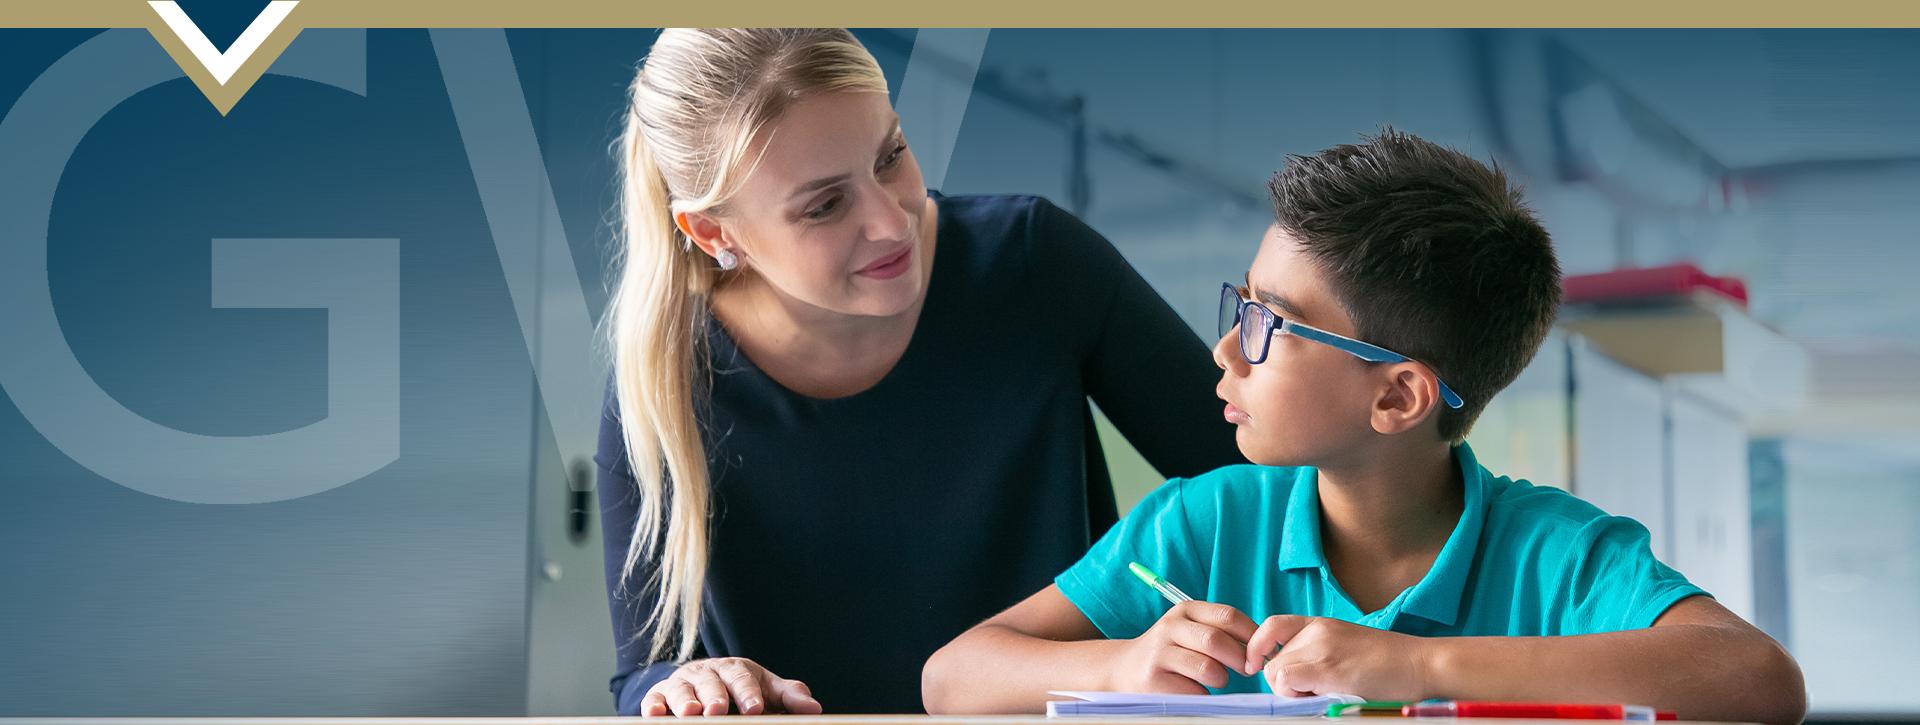 Teacher leans over to check on elementary student sitting at desk (Image by pch.vector on Freepik - https://www.freepik.com/free-photo/cheerful-school-teacher-giving-help-support-schoolboy-class_13996083.htm#&position=5&from_view=user )